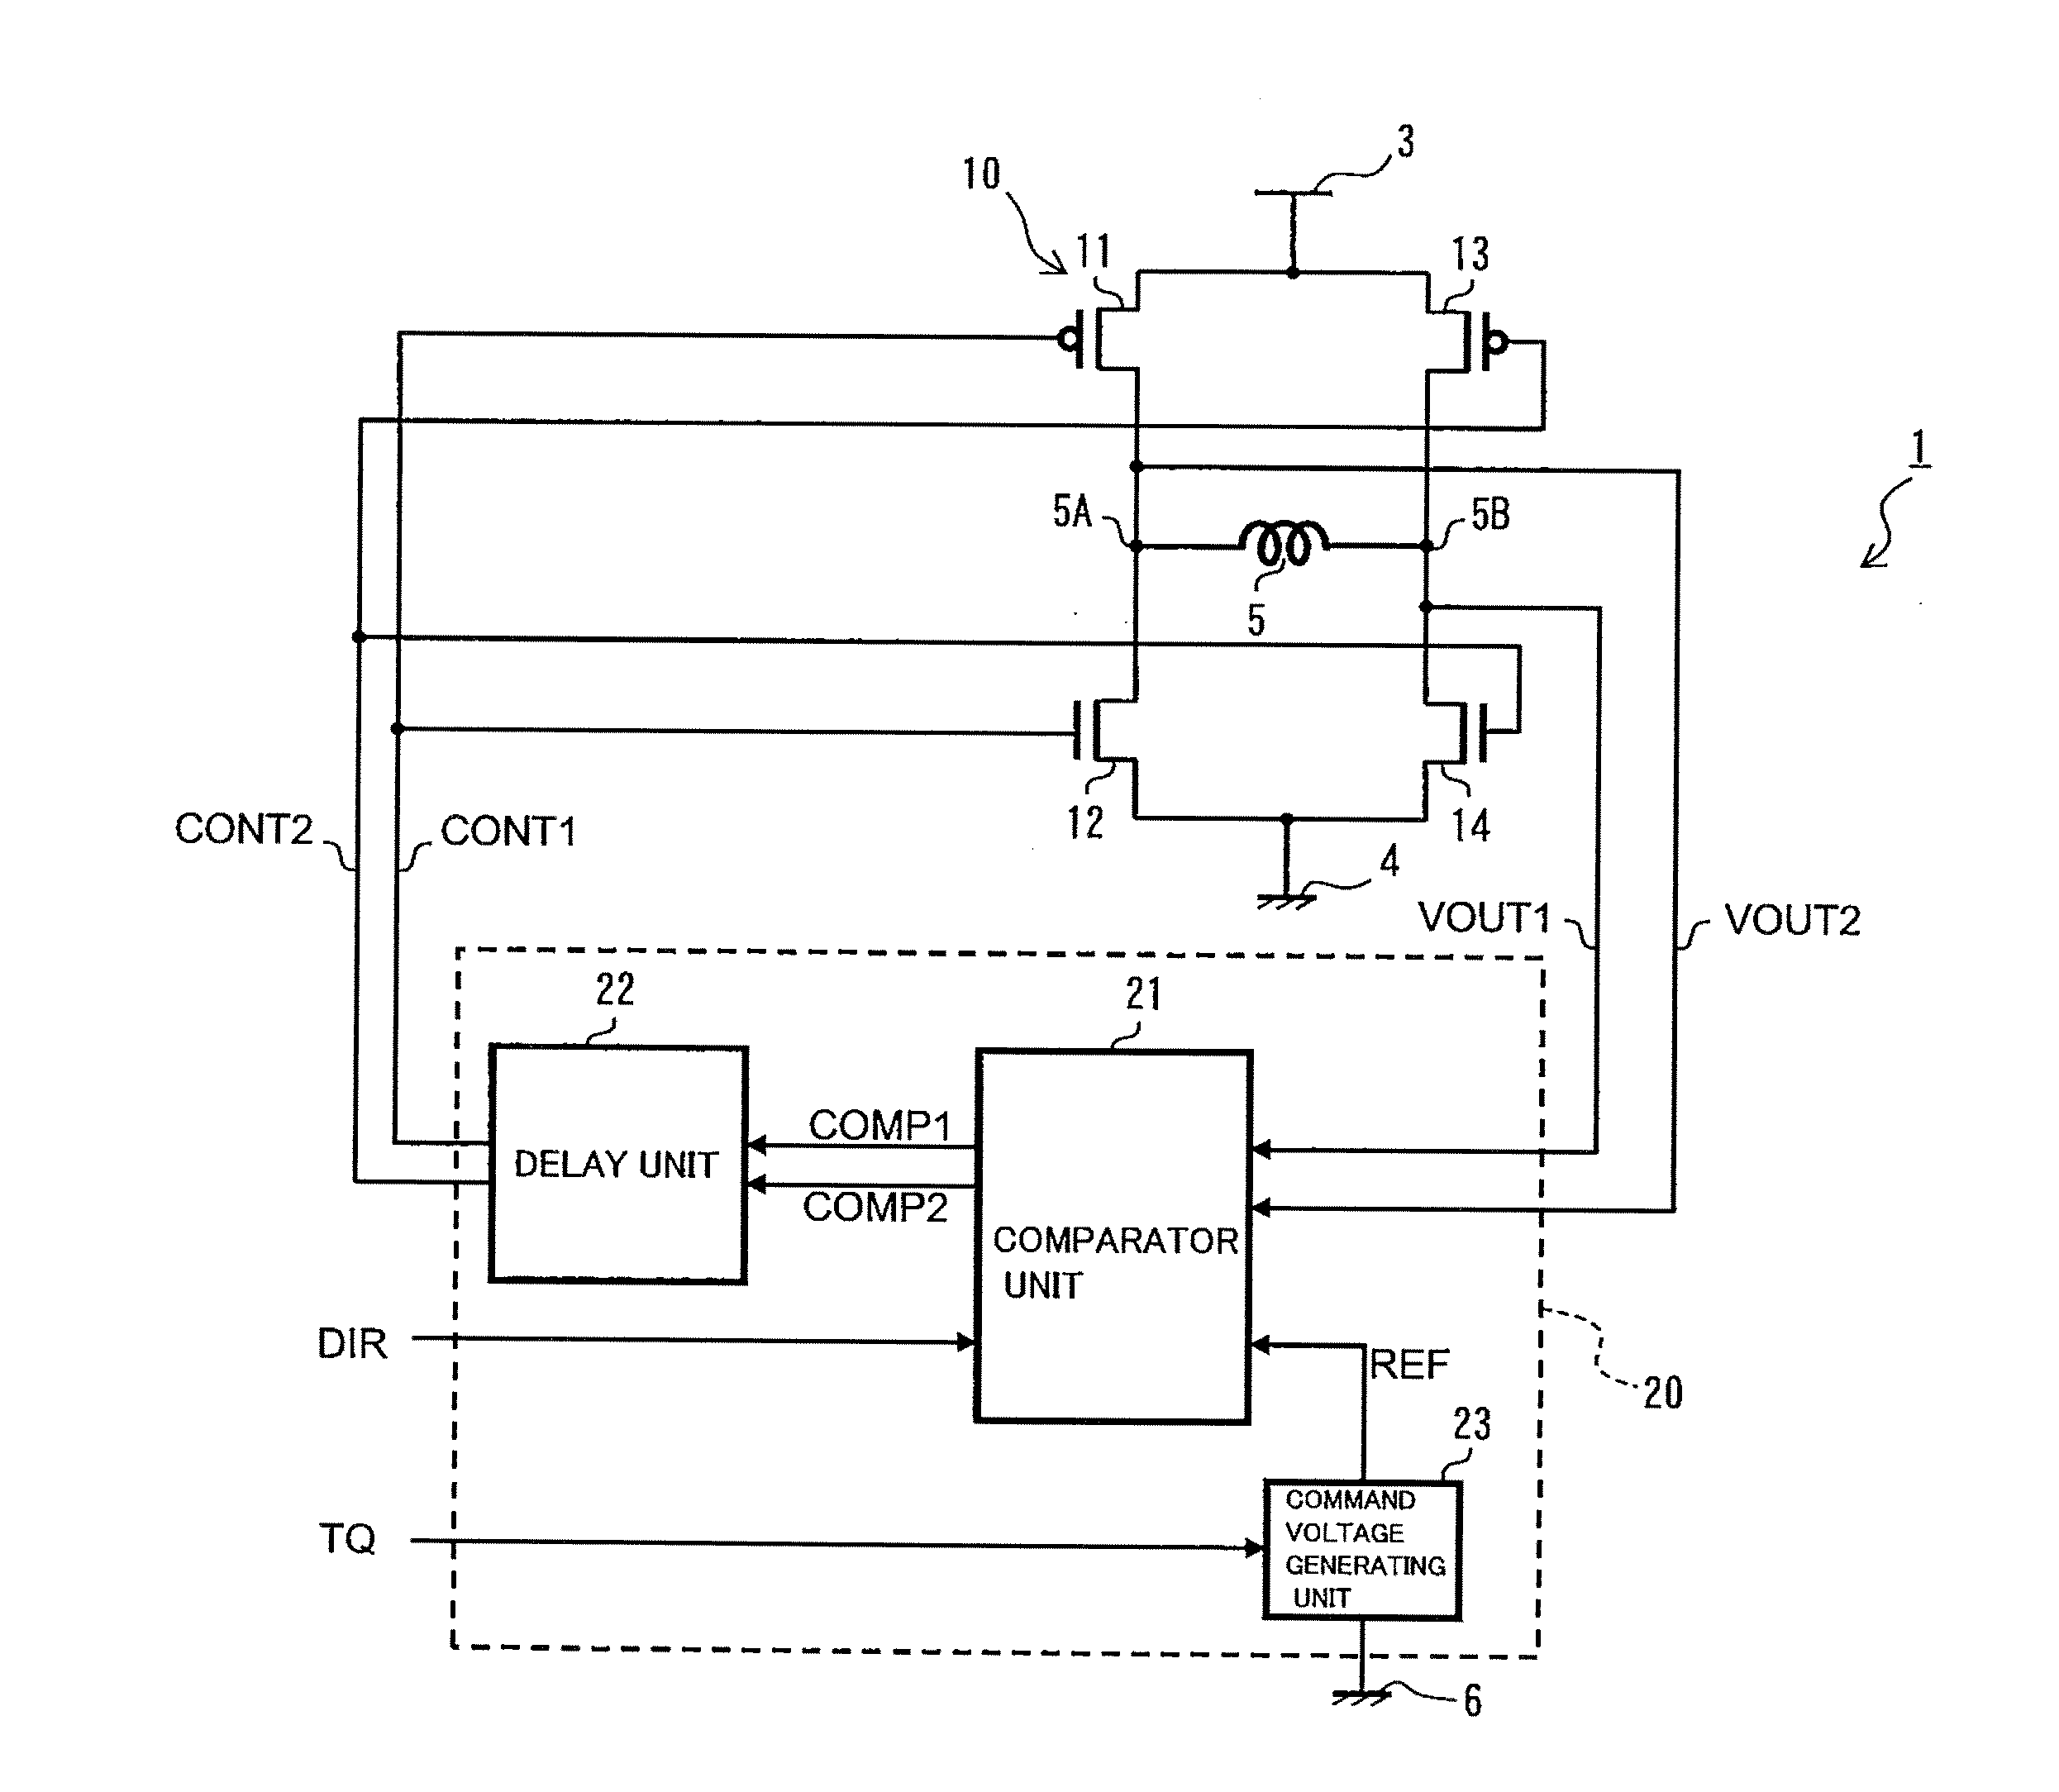 Induction load driving system